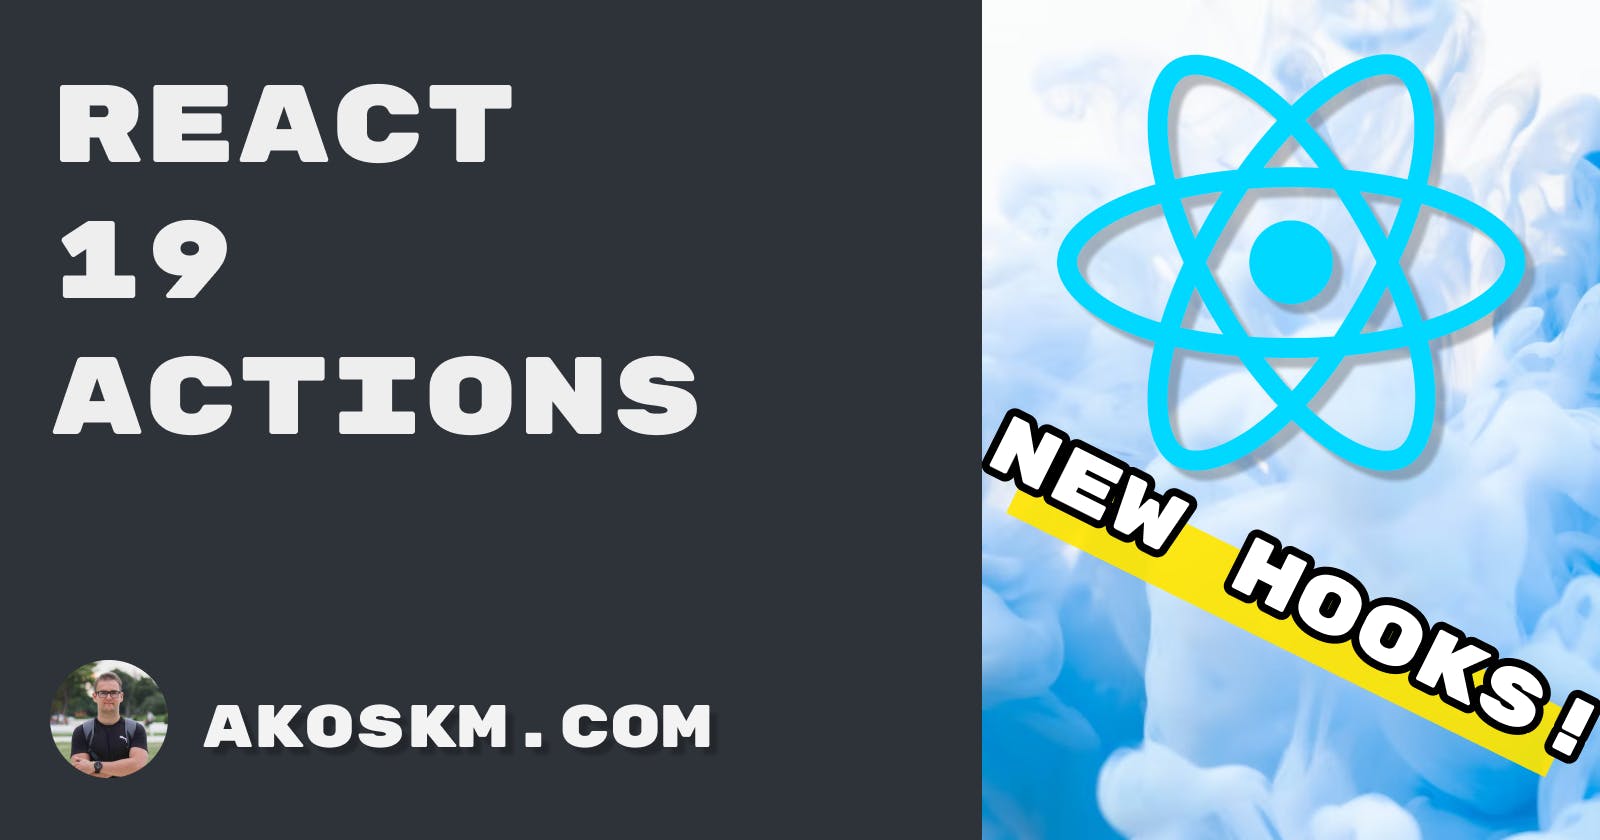 What's New in React 19: Action Hooks